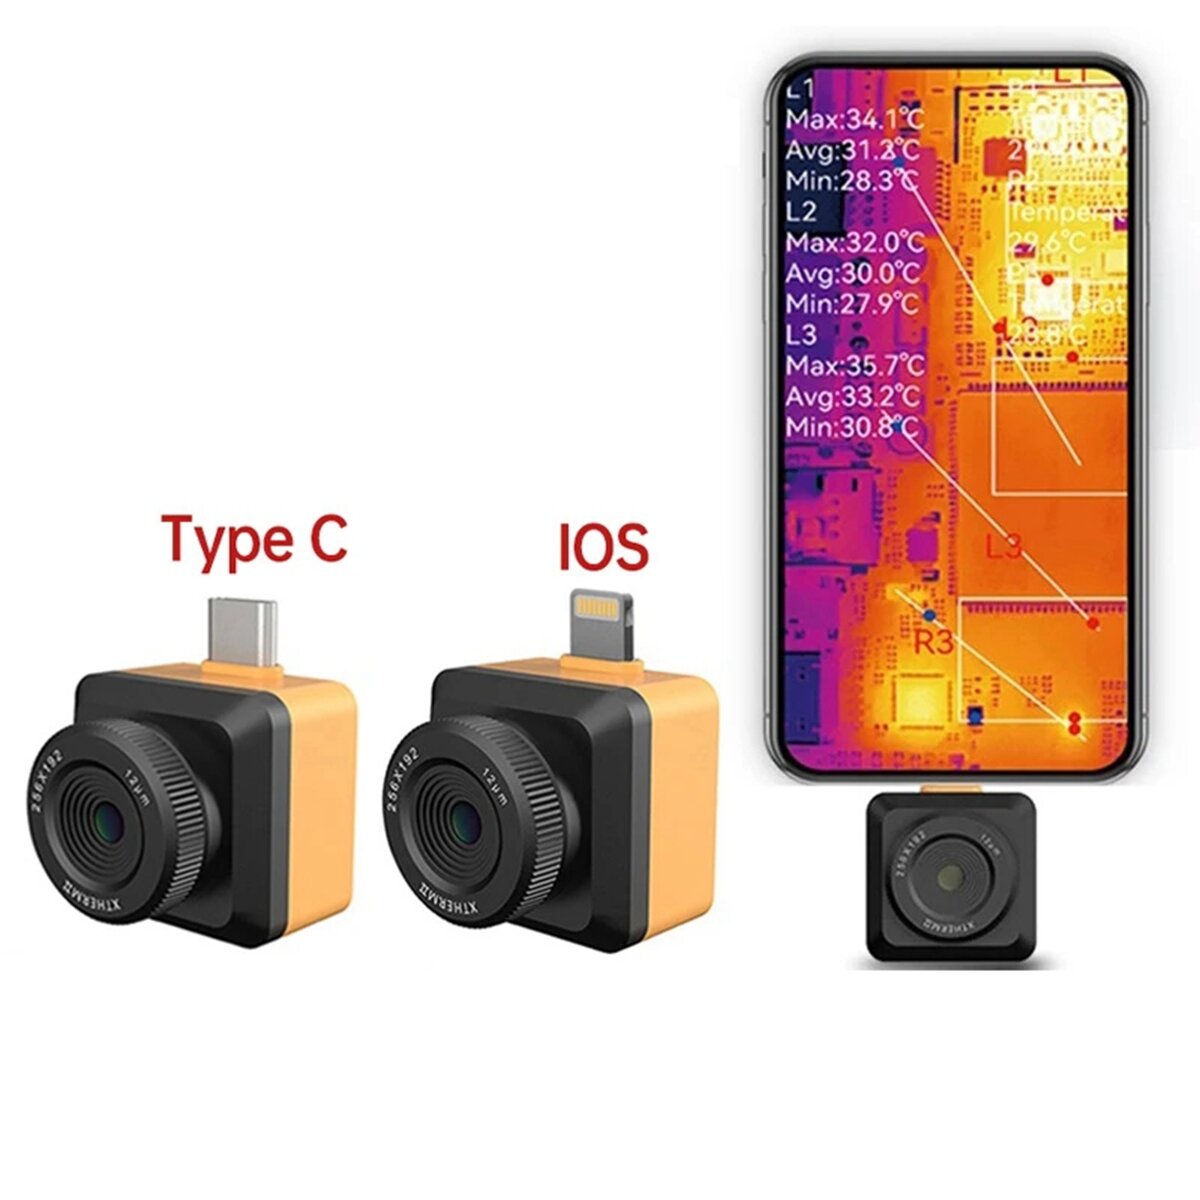 INFIRAY T2S+ Thermal Imaging Camera 256×192 for Smart Phone IOS Type-C Connector PCB Floor Heat Inspection Infrared Thermal Imager